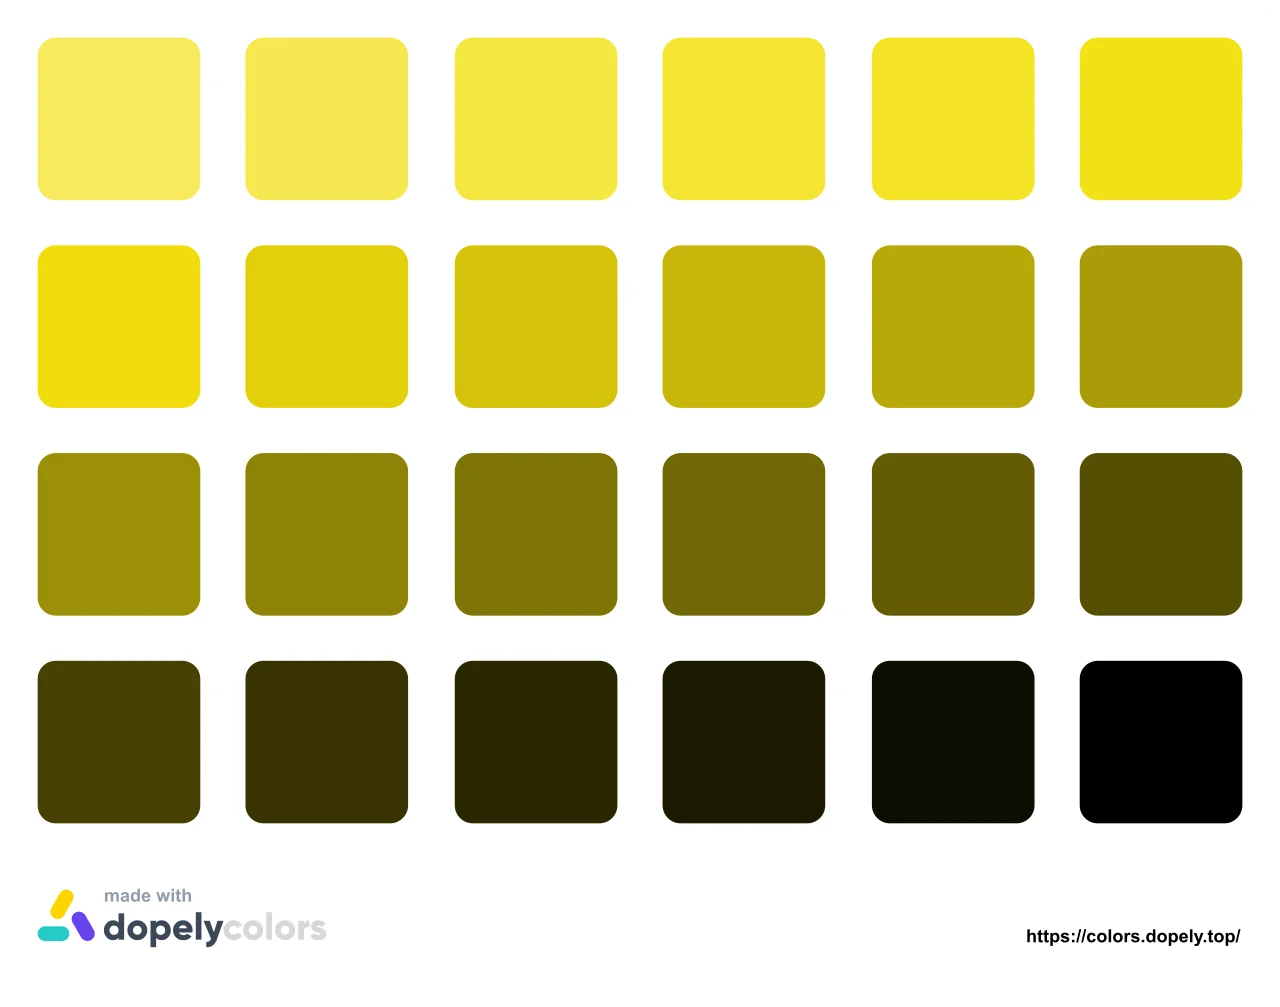 Share colors yellow dopely color toner